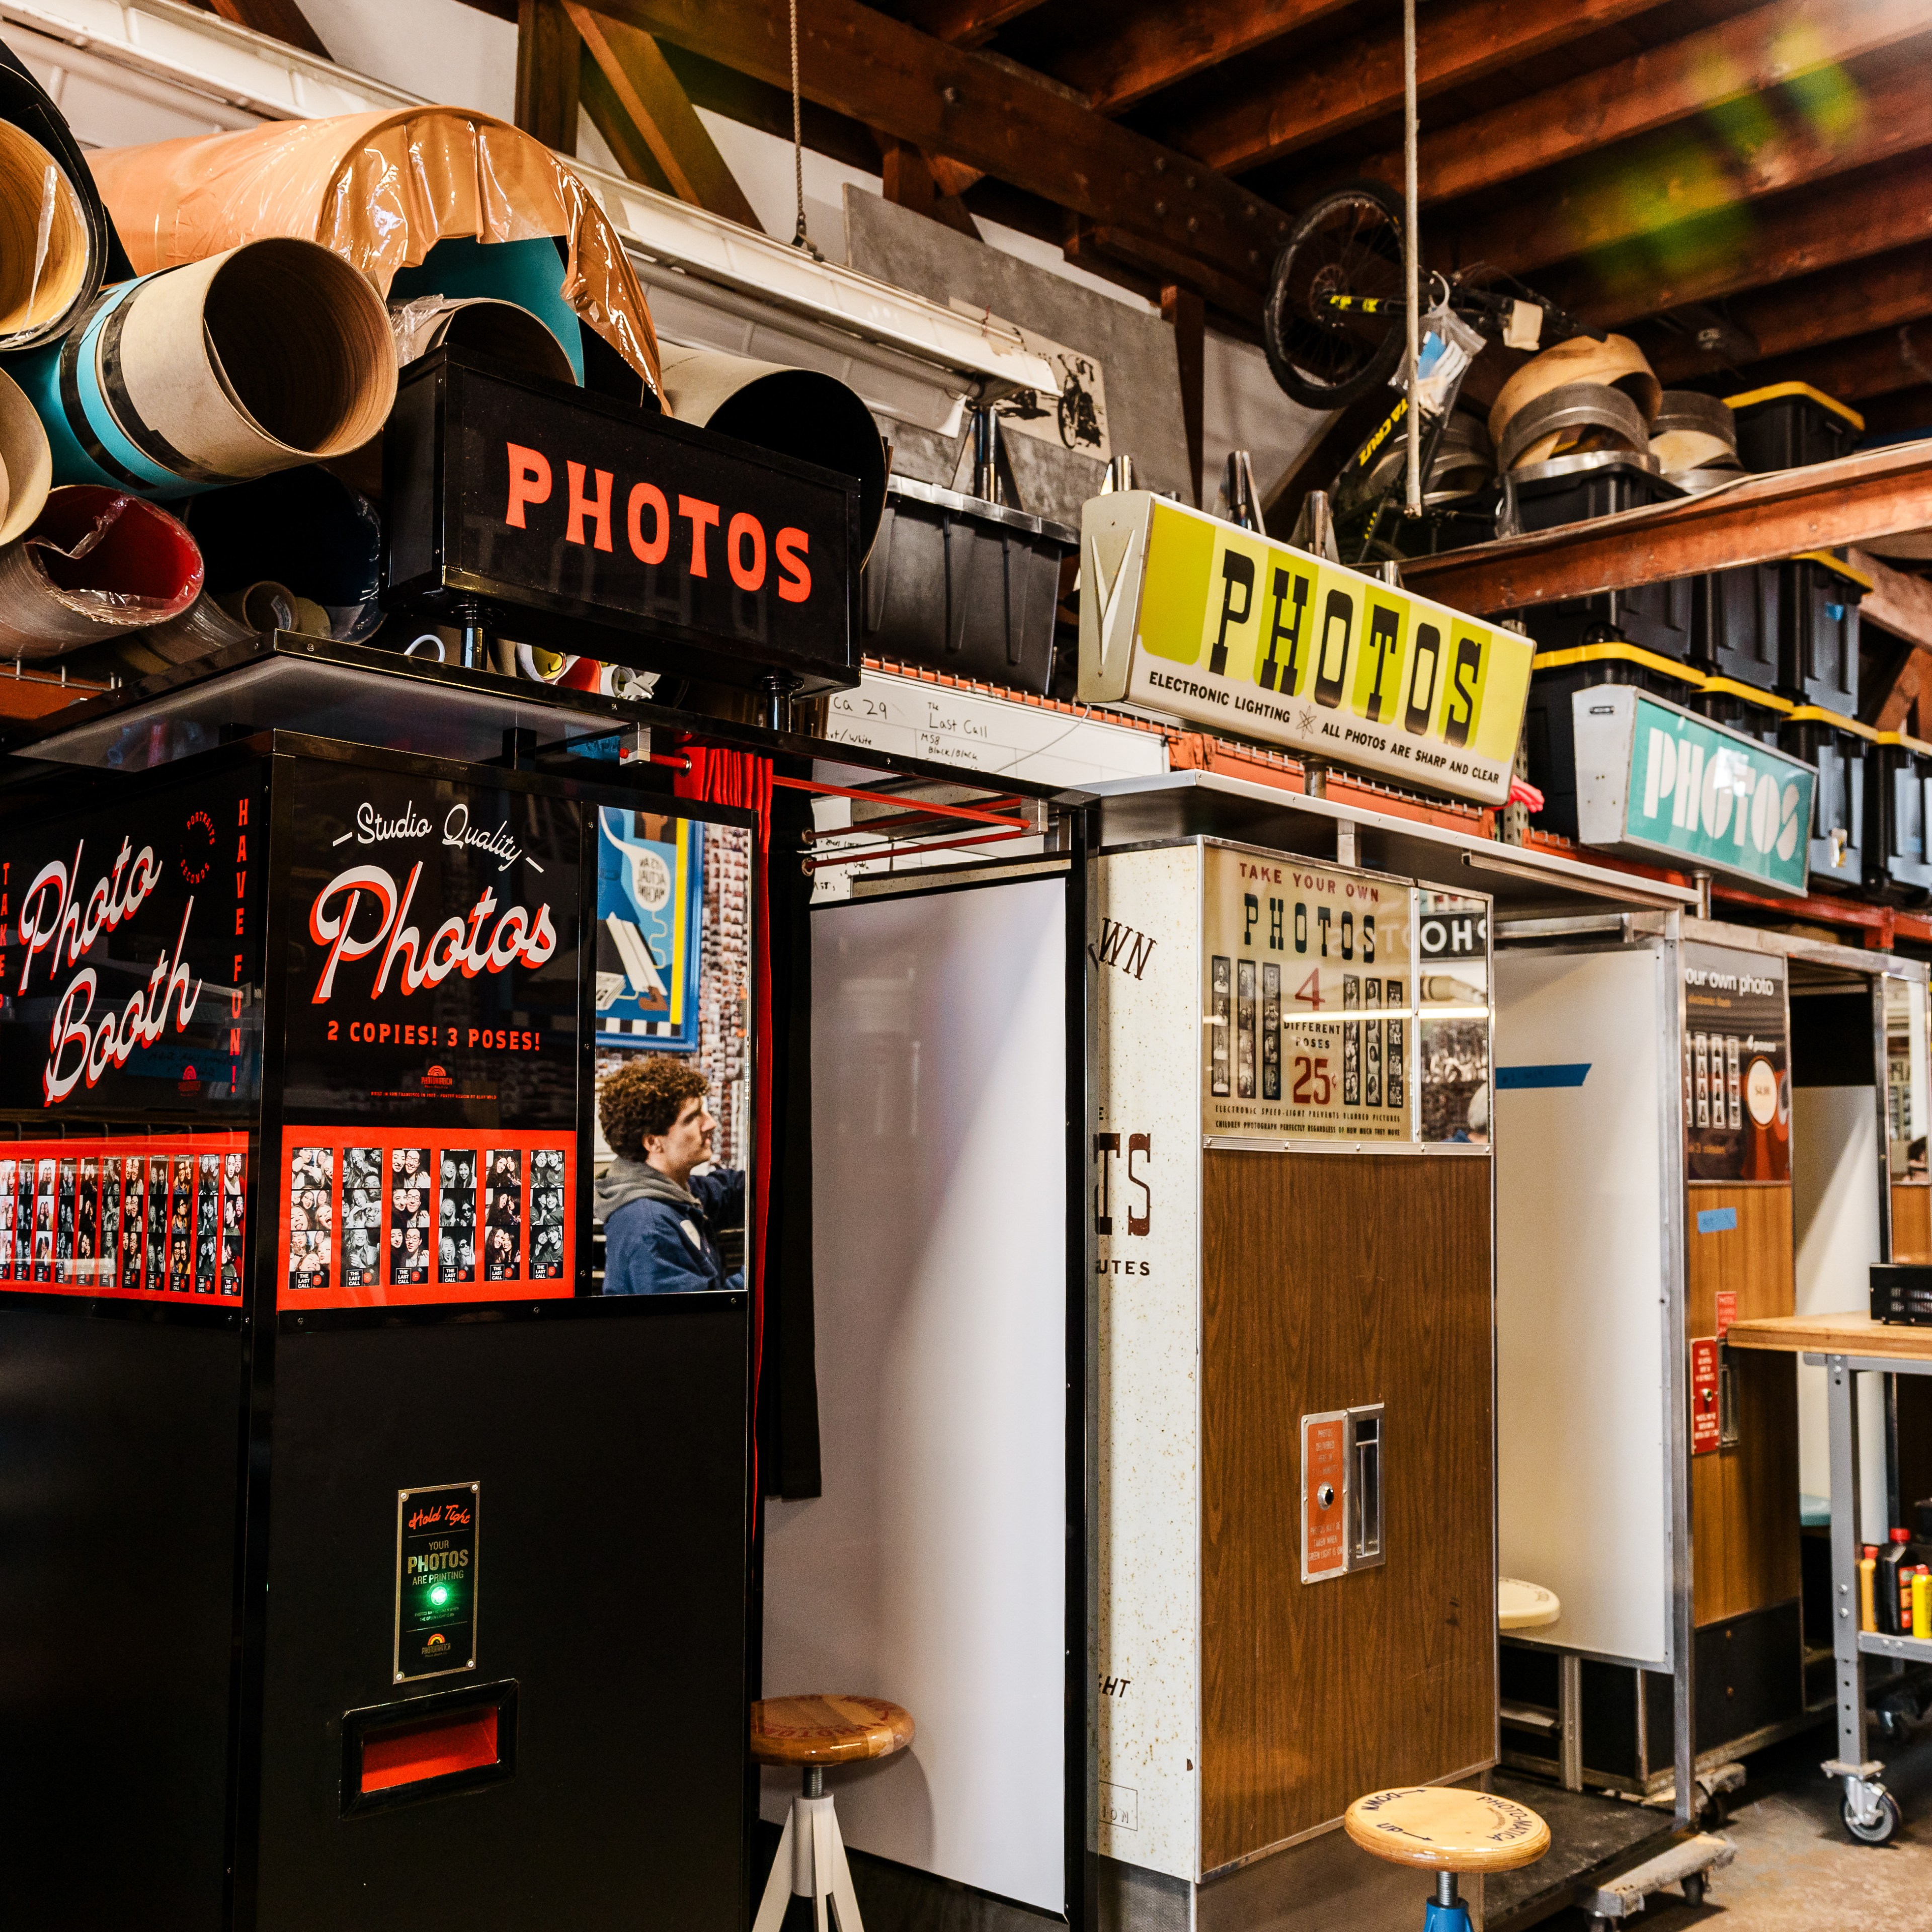 The image shows a room filled with vintage photo booths, each bearing signs that say &quot;PHOTOS&quot;. The room is cluttered with photo rolls and has a wooden ceiling.